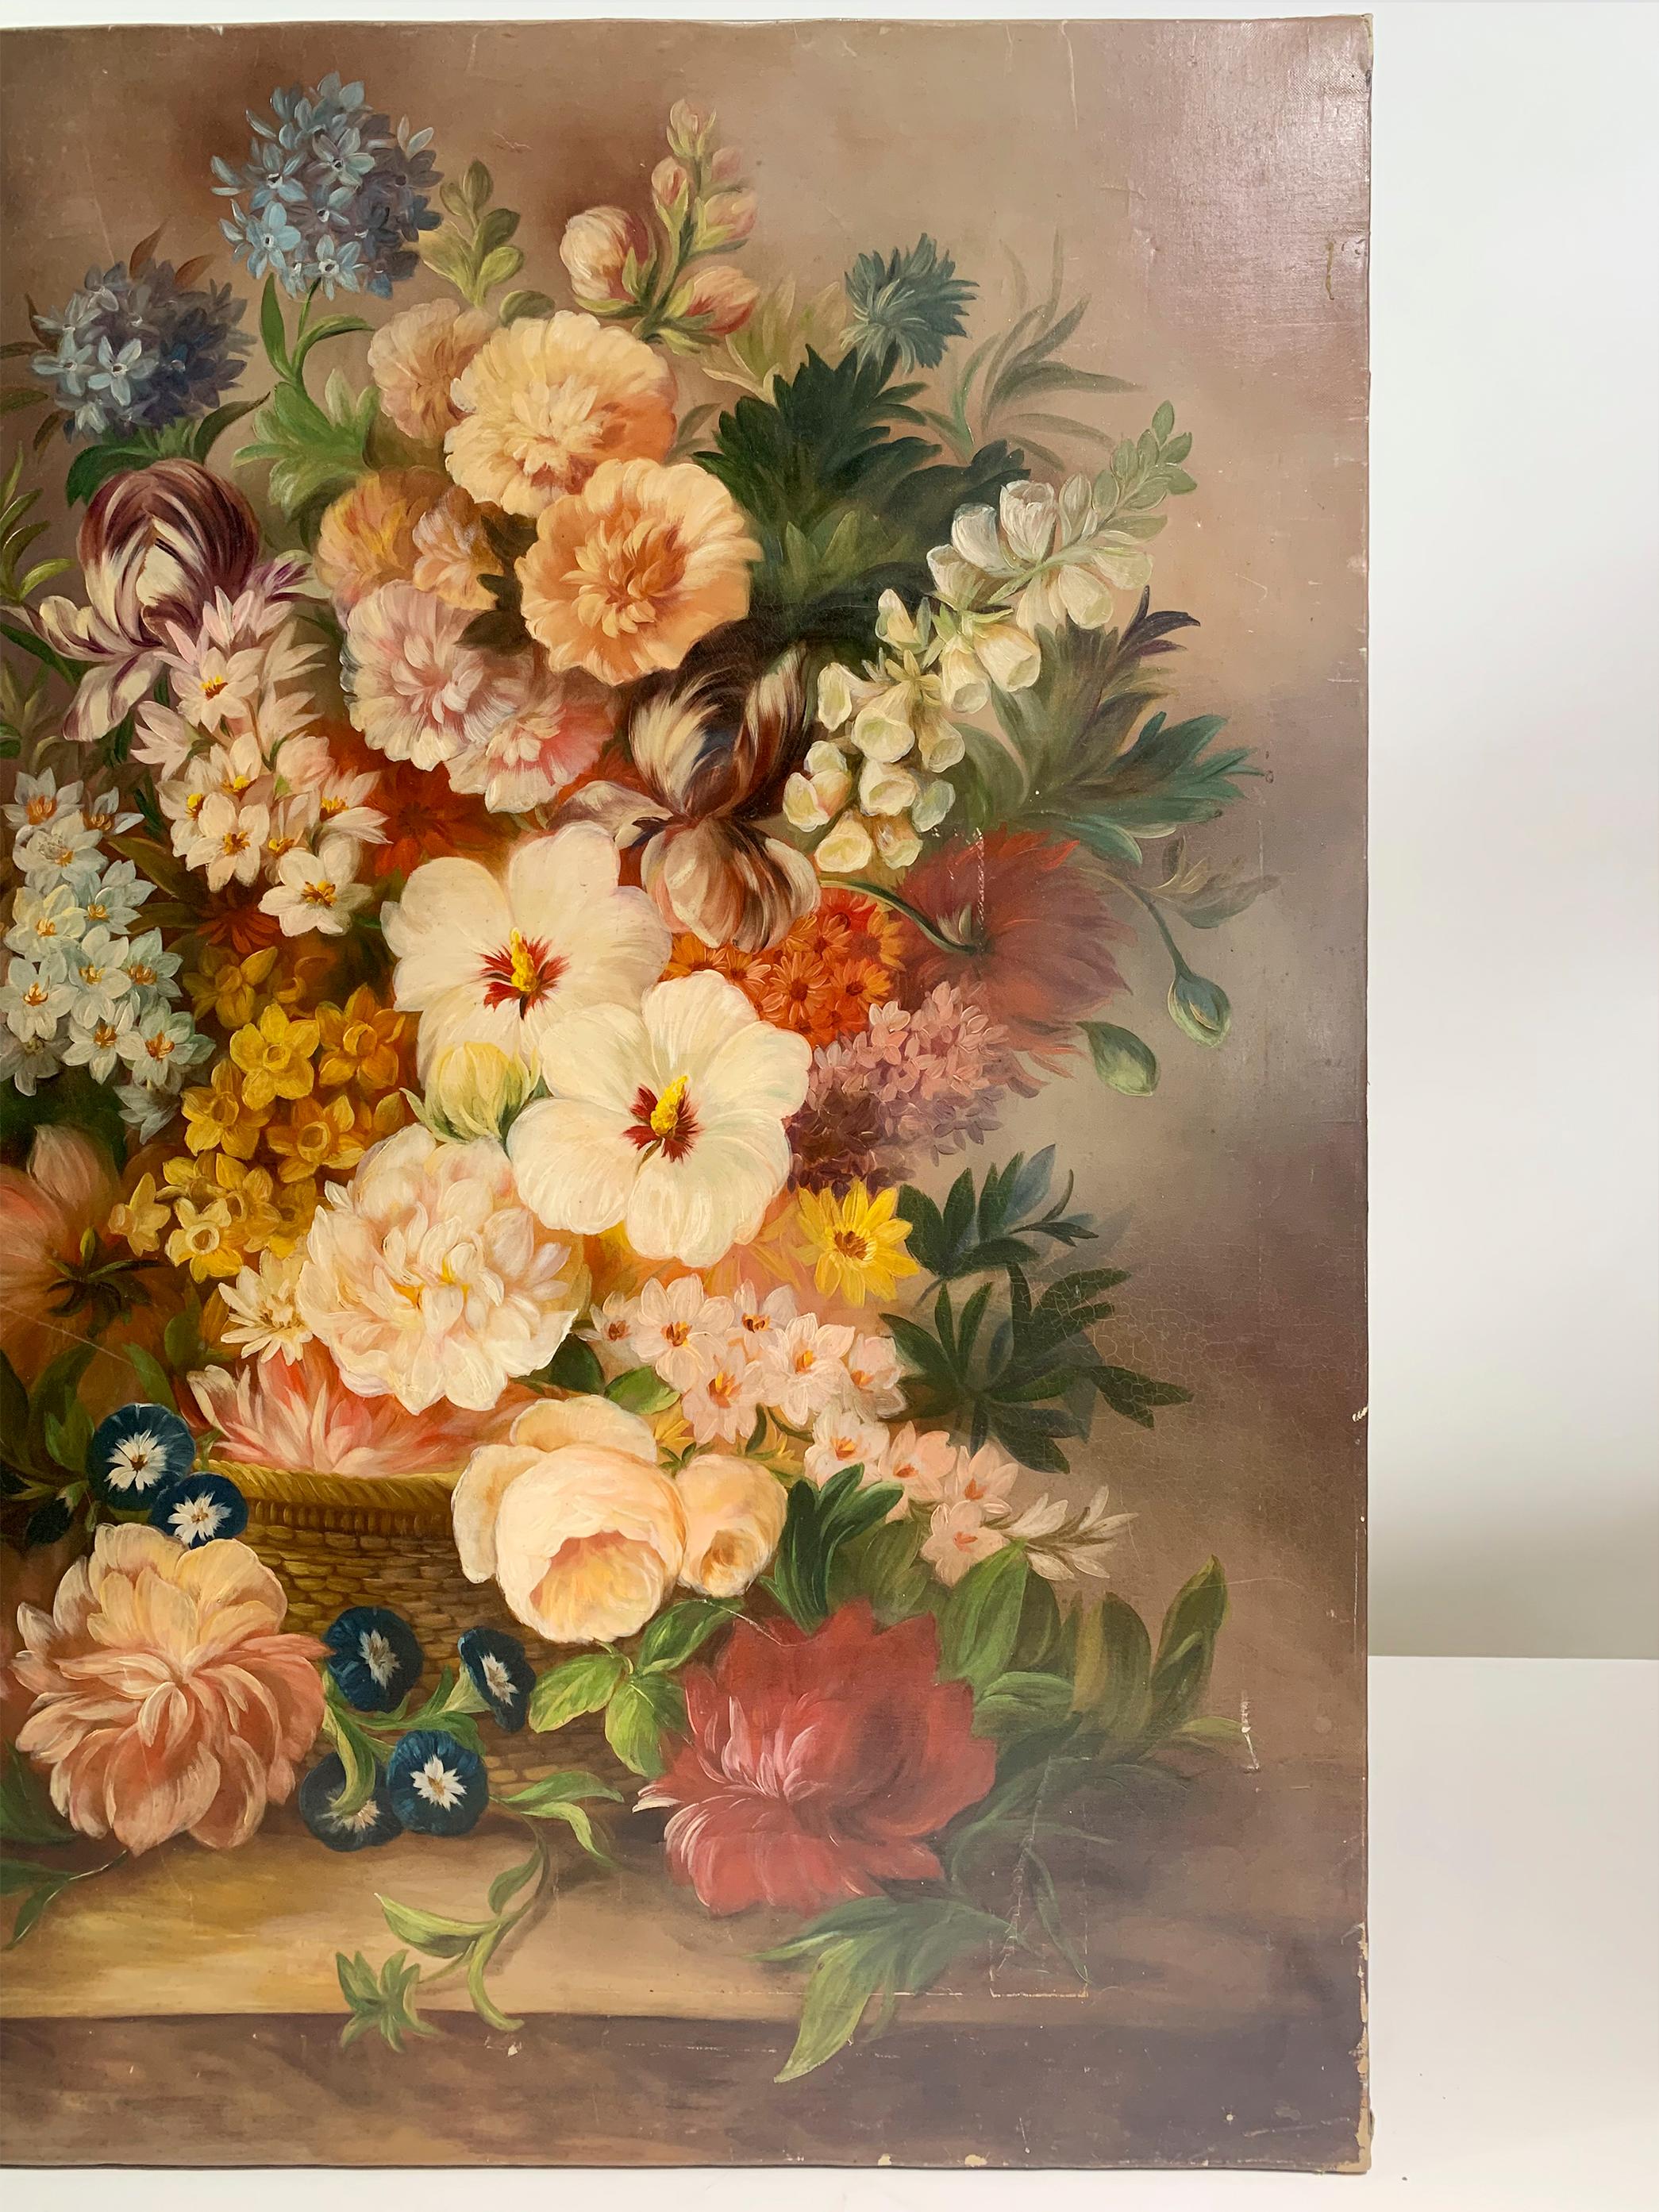 Other 19th Century Floral Still Life Painting - Oil on Canvas - Signed Anne Maurin For Sale